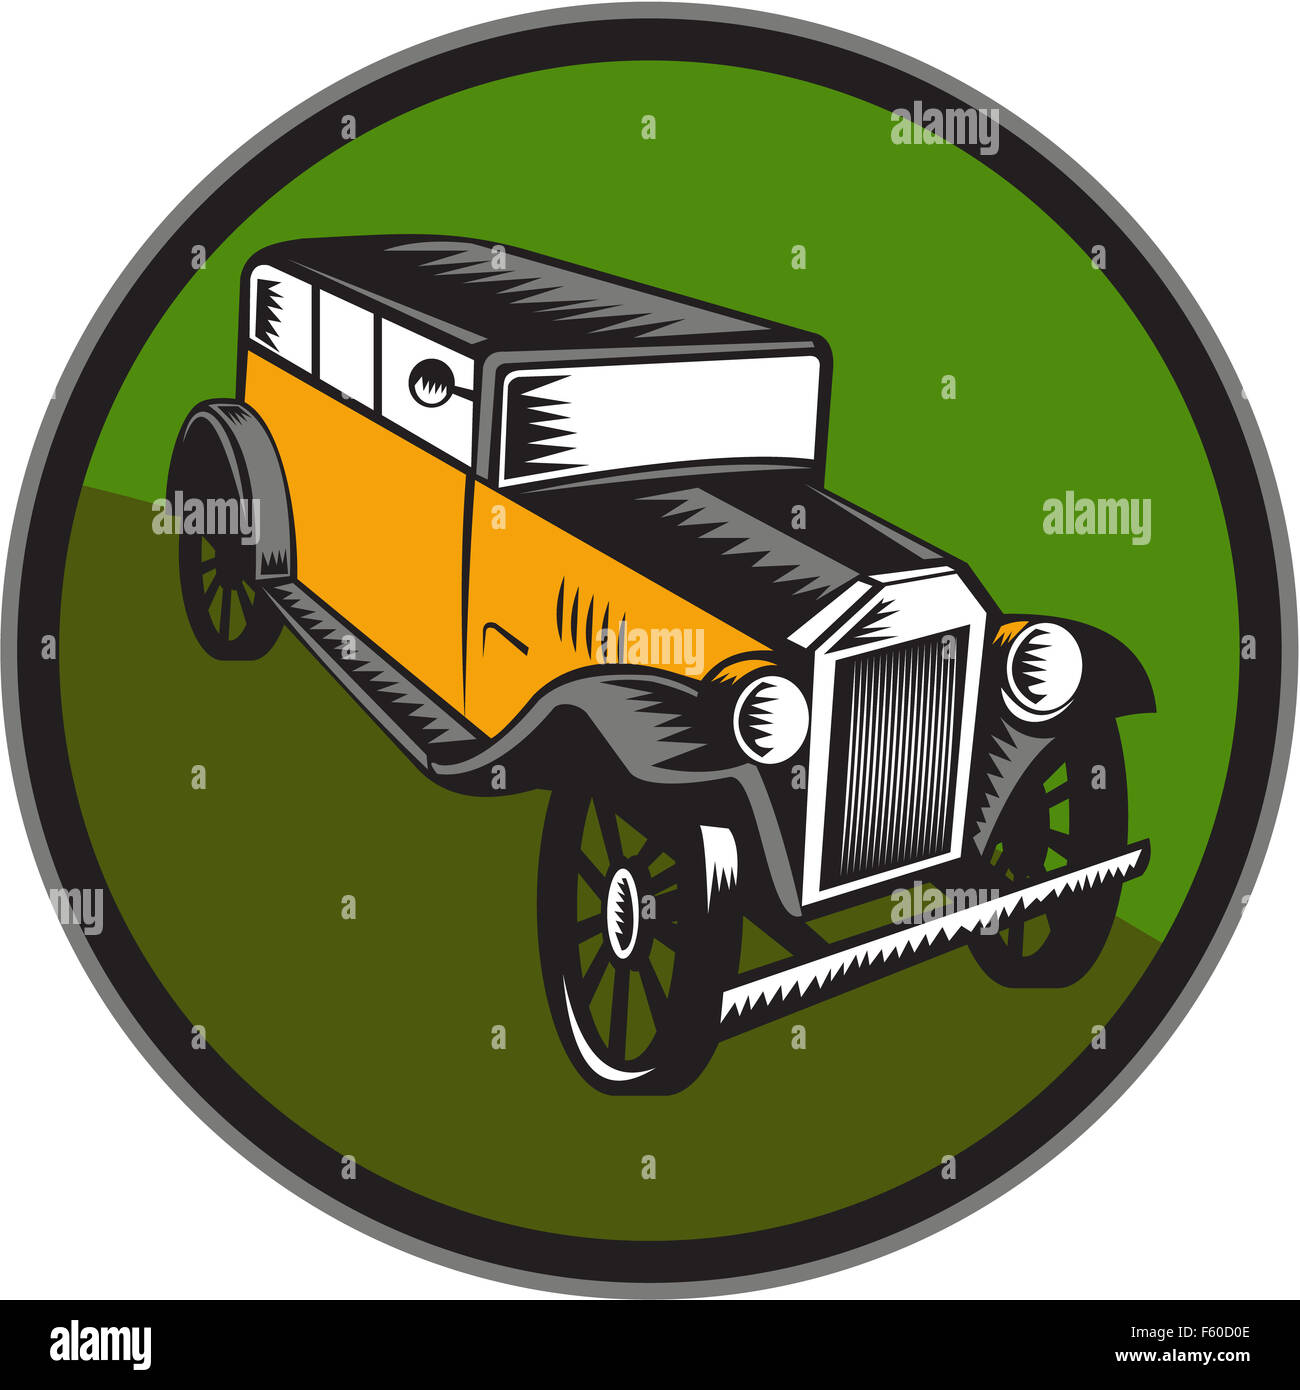 Illustration of a vintage car viewed from high angle set inside circle on isolated background done in retro woodcut style. Stock Photo